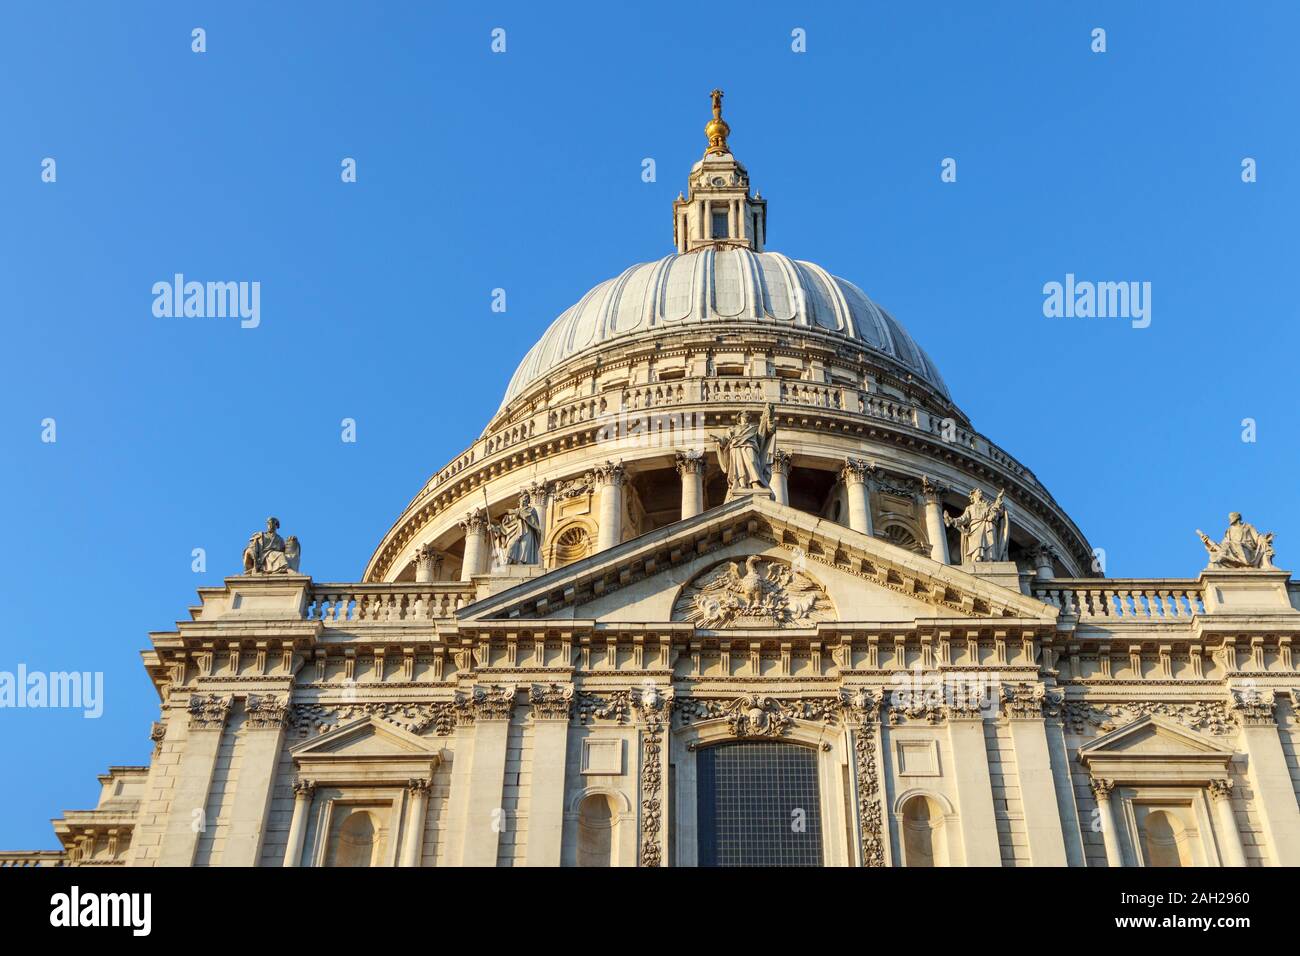 View of the iconic London landmark, historic St Paul's Cathedral with its dome designed by Sir Christopher Wren, on a sunny autumn day Stock Photo